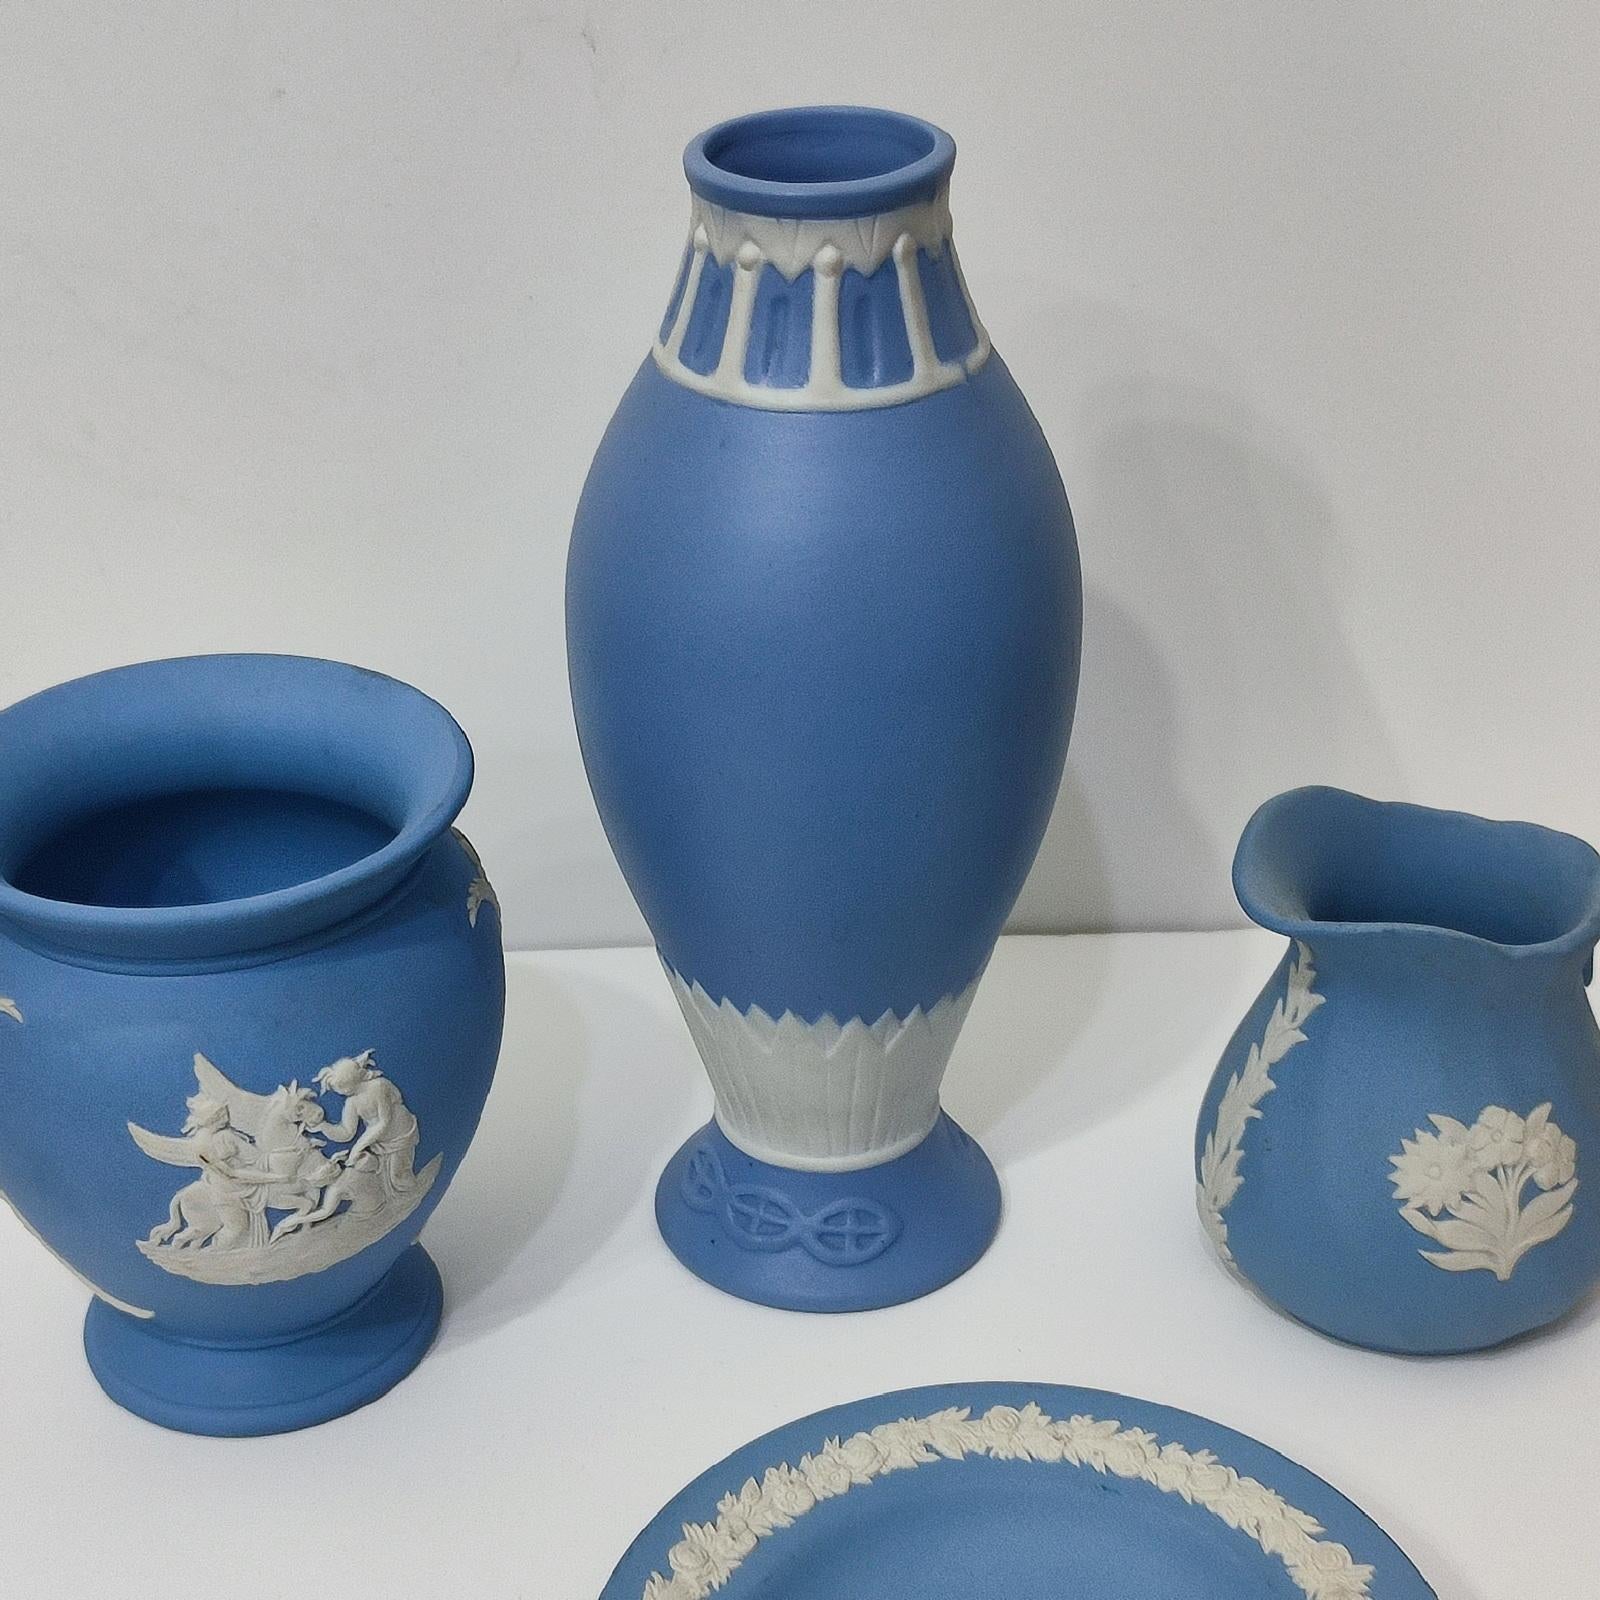 Ceramic Wedgwood Blue Jasper Ware Vessels Classical Scenes, Collection of 4, FREESHIP For Sale